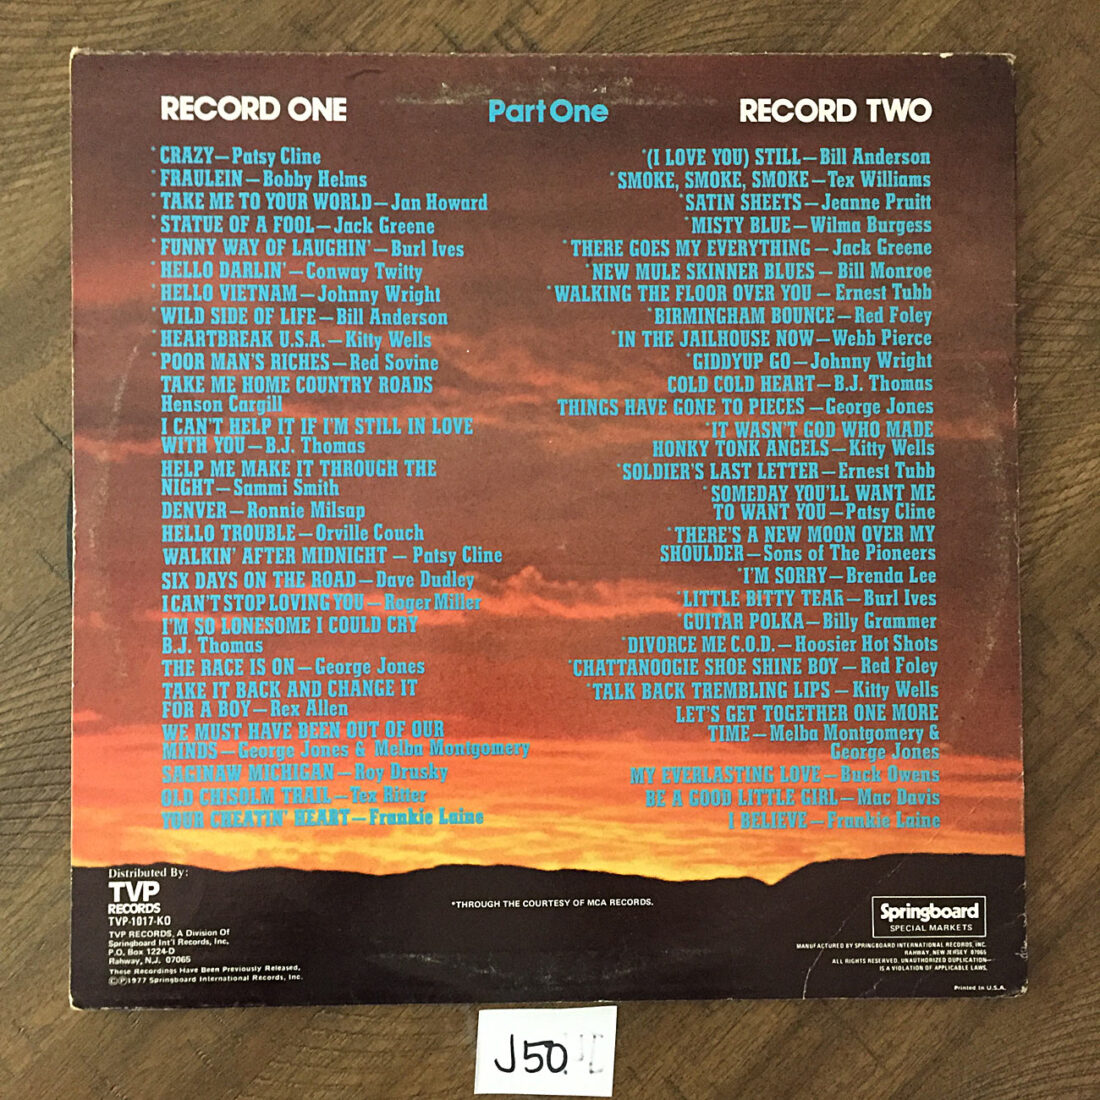 100 All-Time Country Hall of Fame Hits – Part One 2-Record Vinyl Set (1977) [J50]